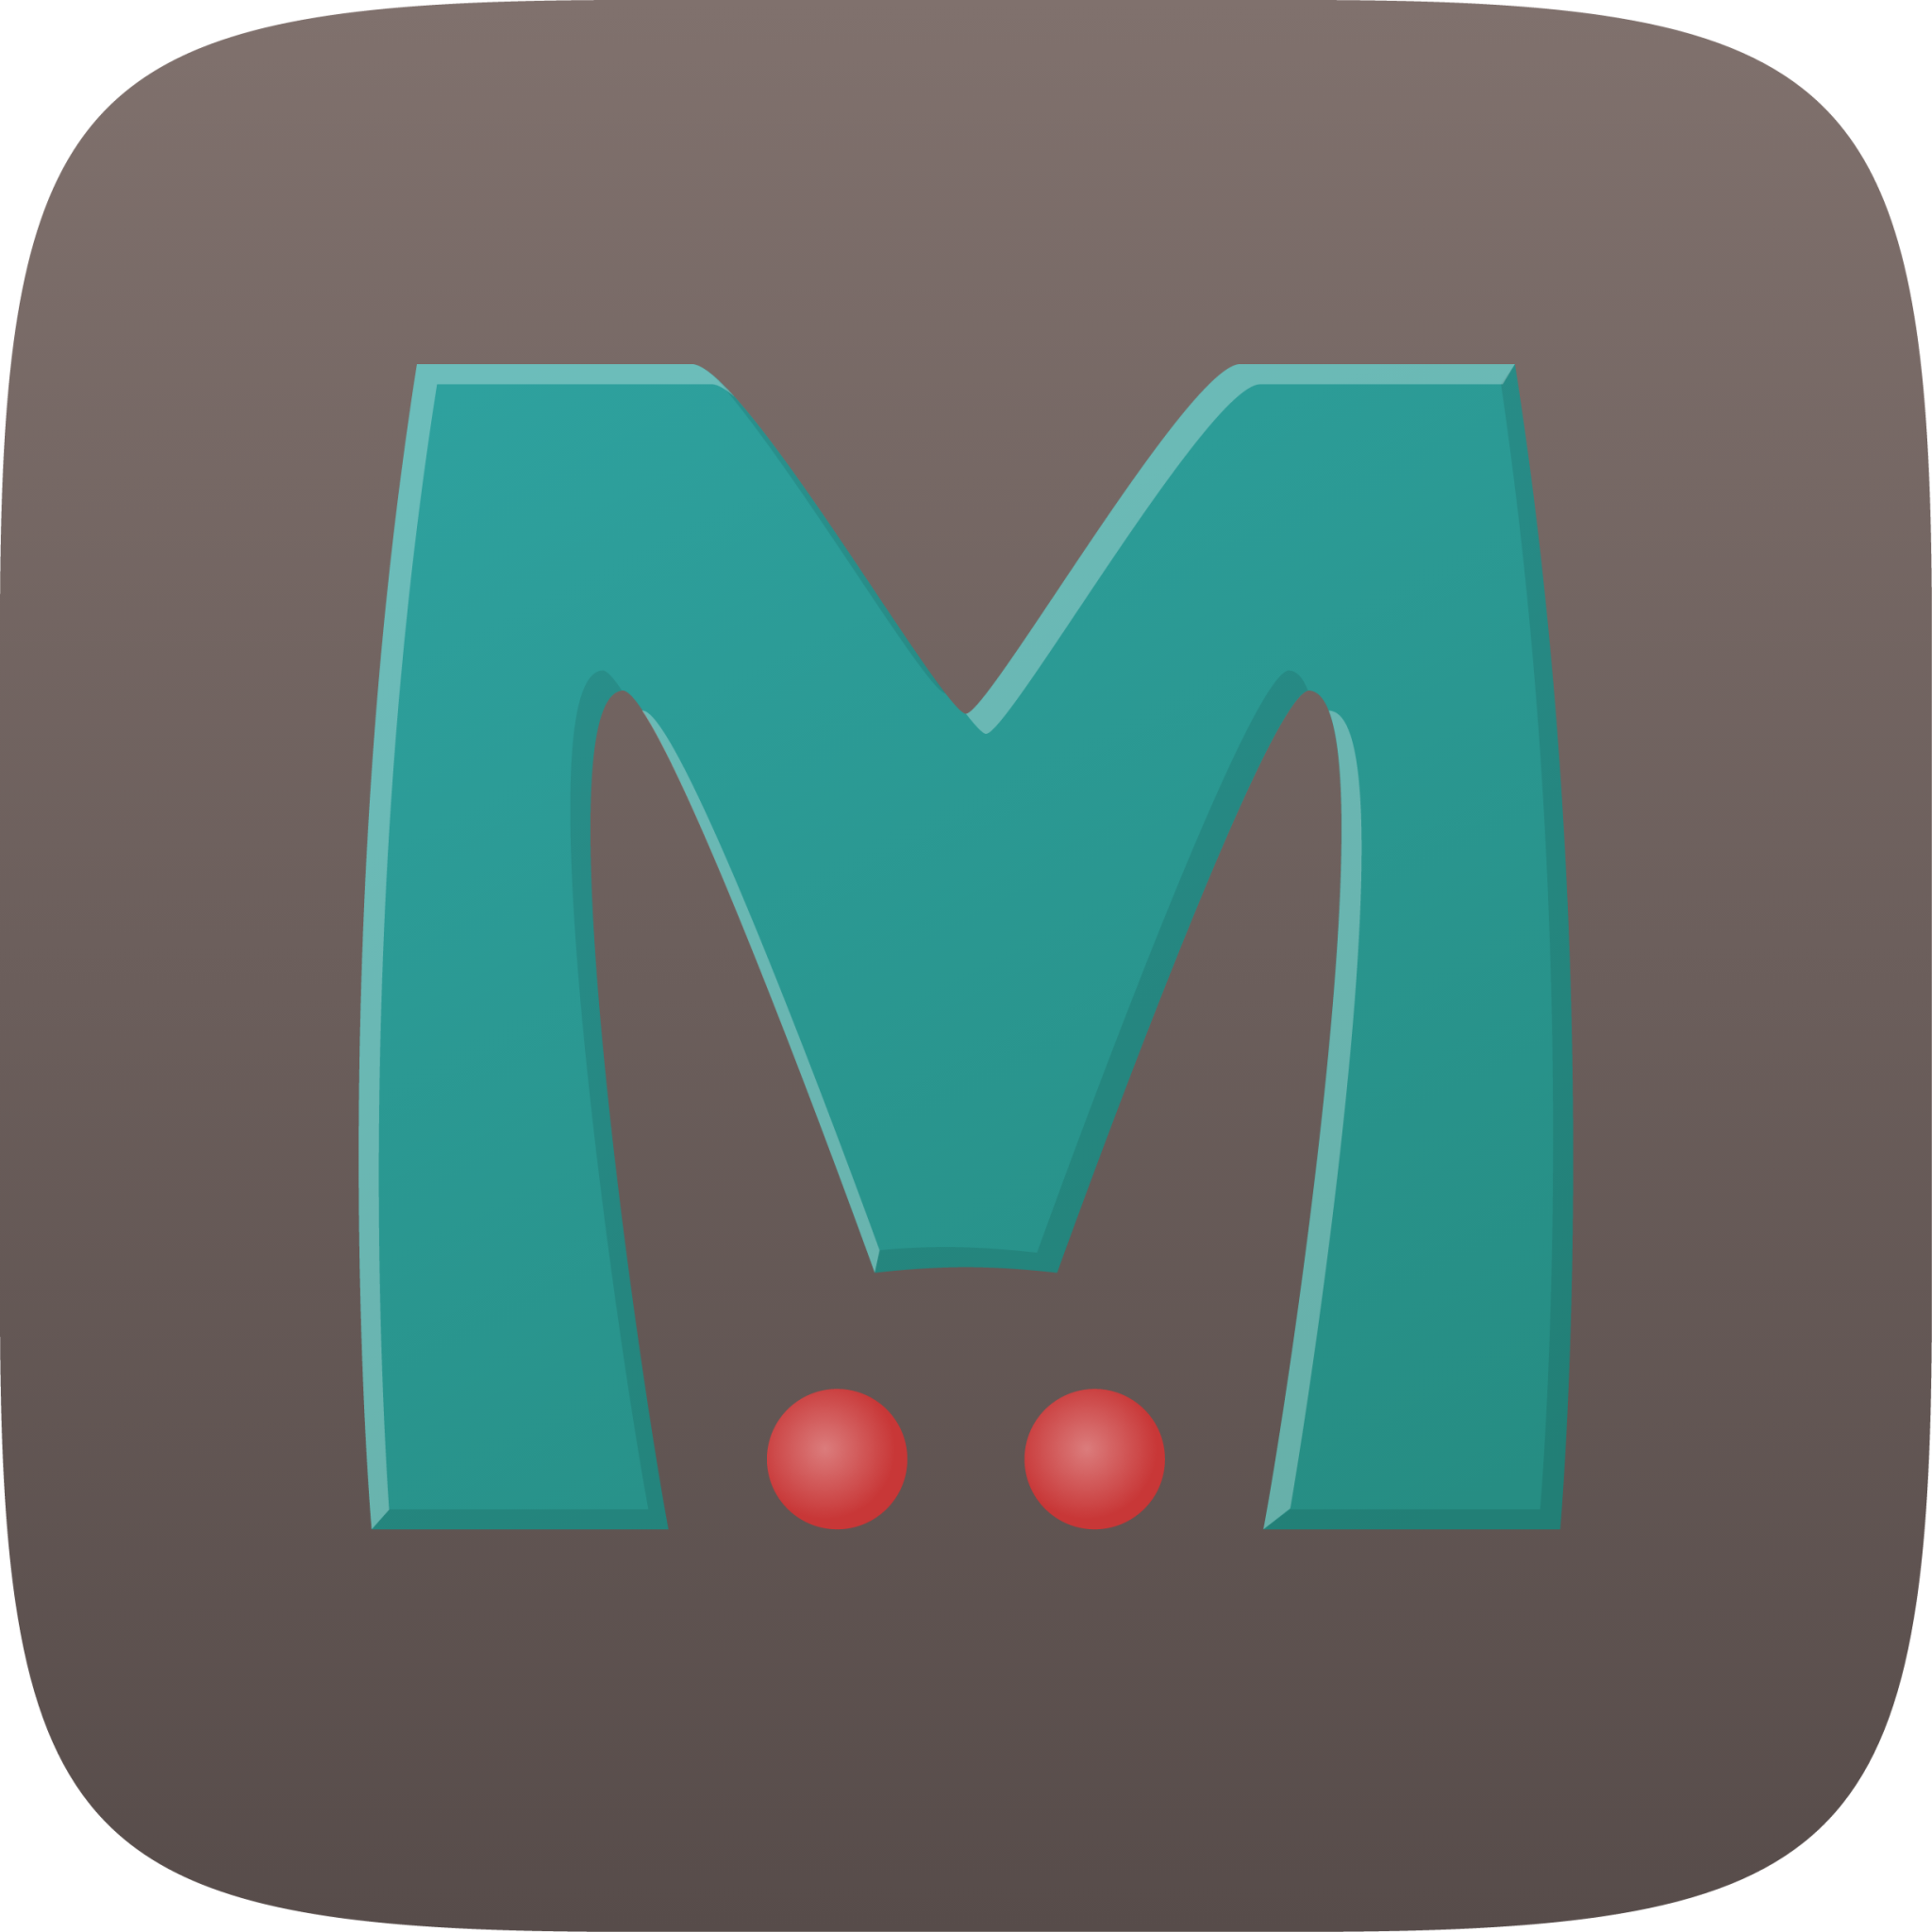 memcached icon